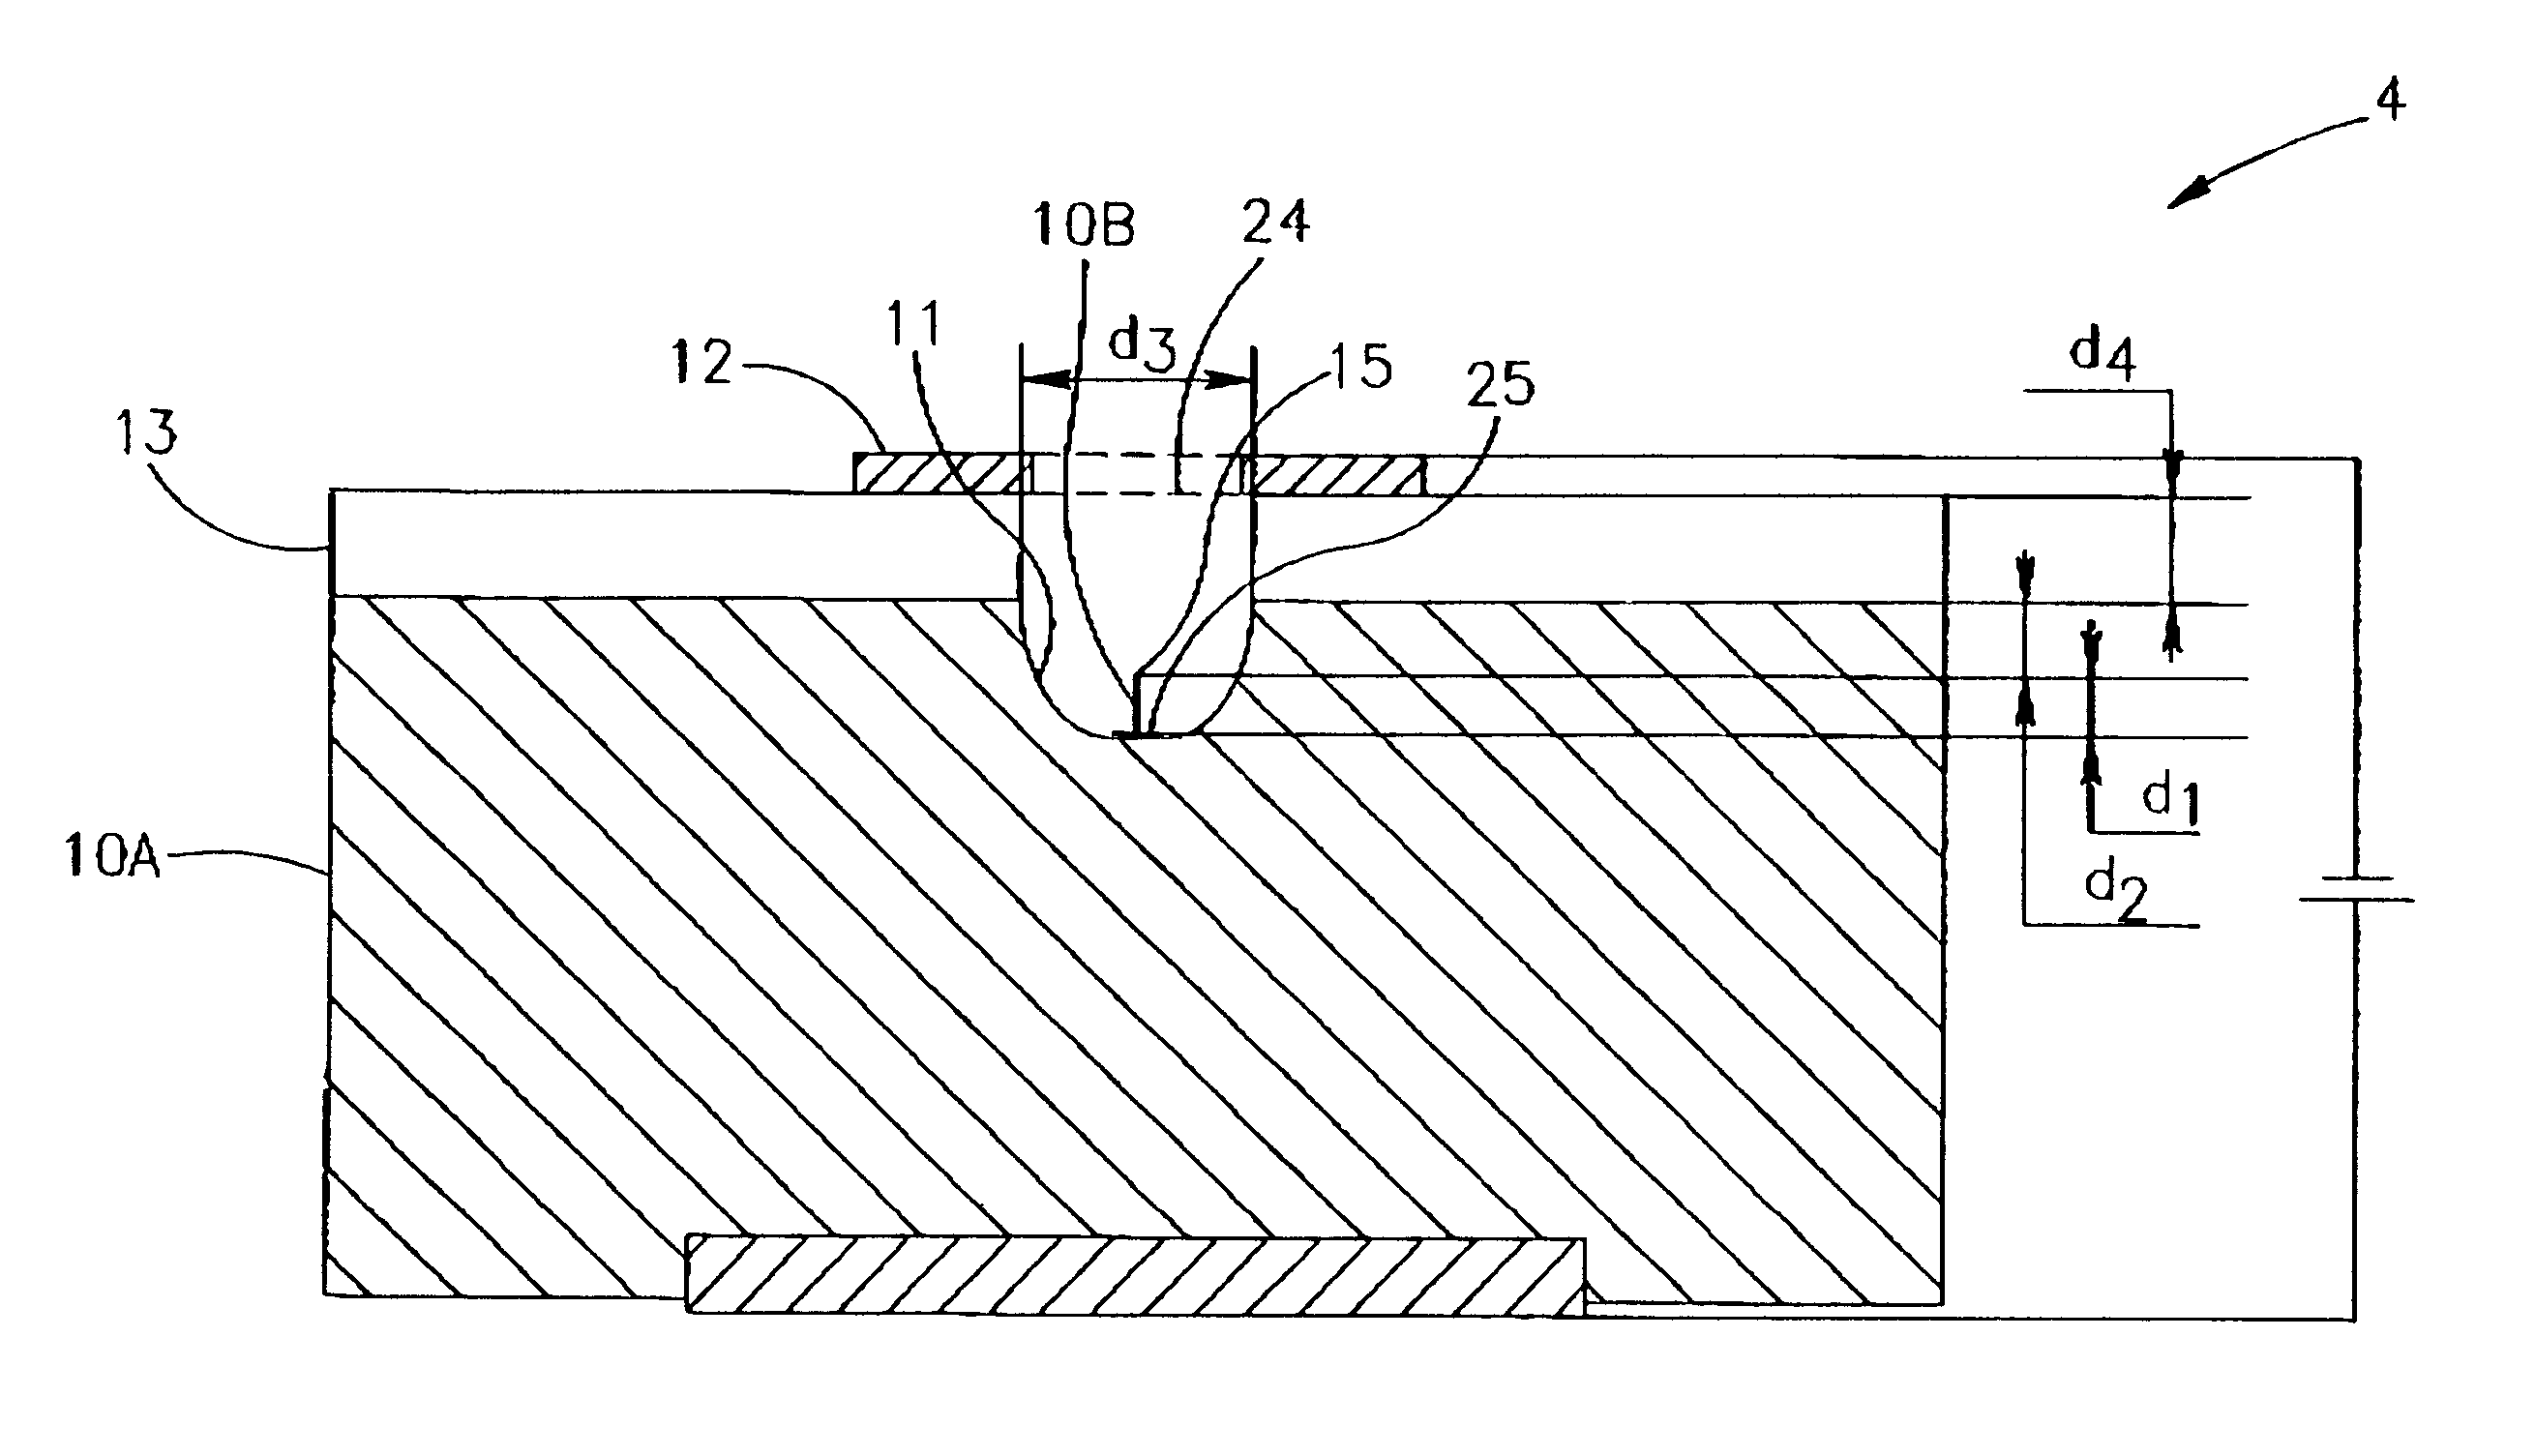 Nanotube-based electron emission device and systems using the same